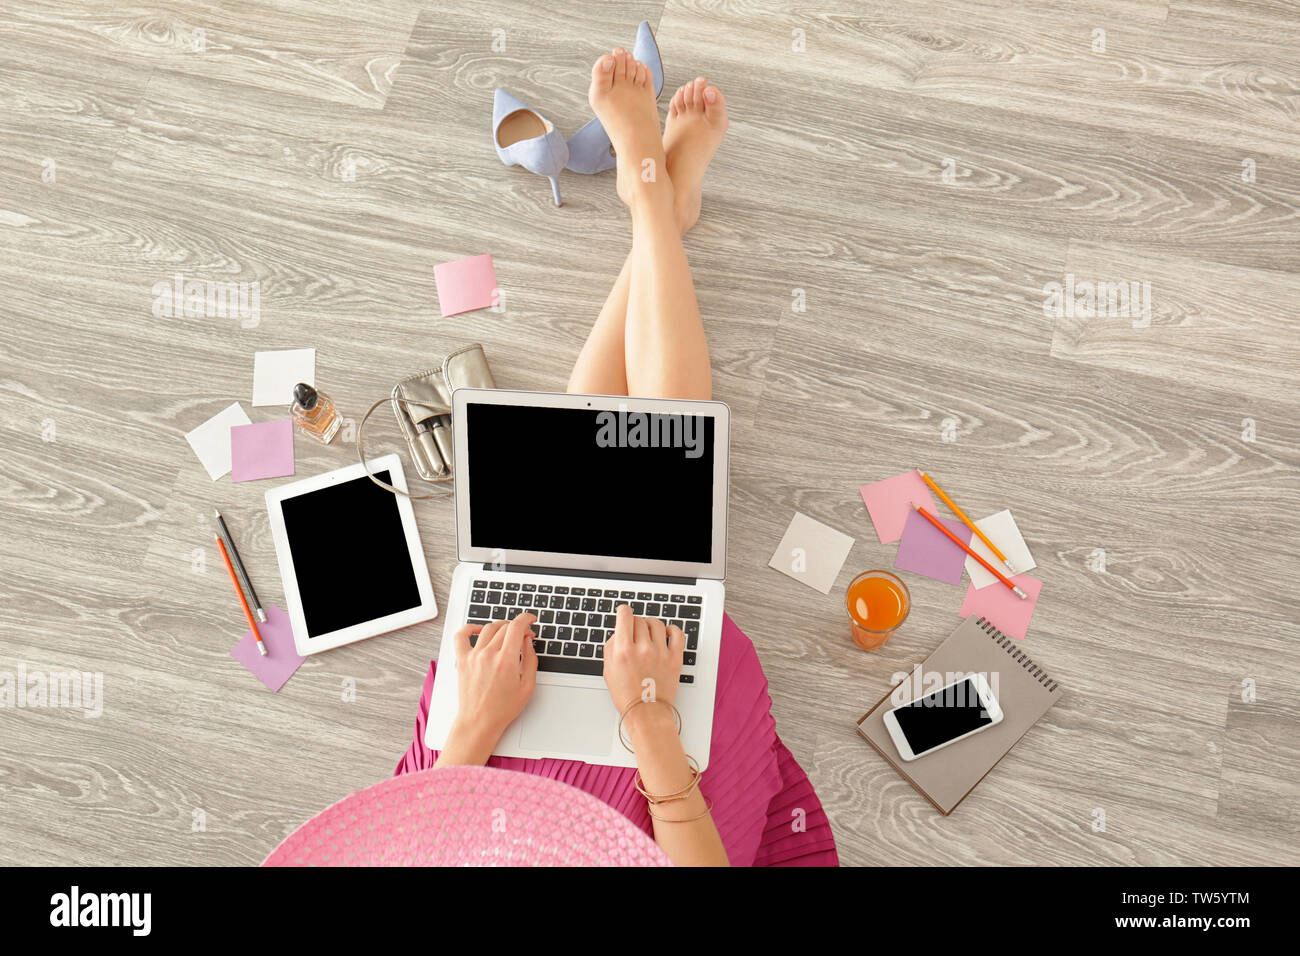 Young beauty blogger using laptop while sitting on floor Stock Photo